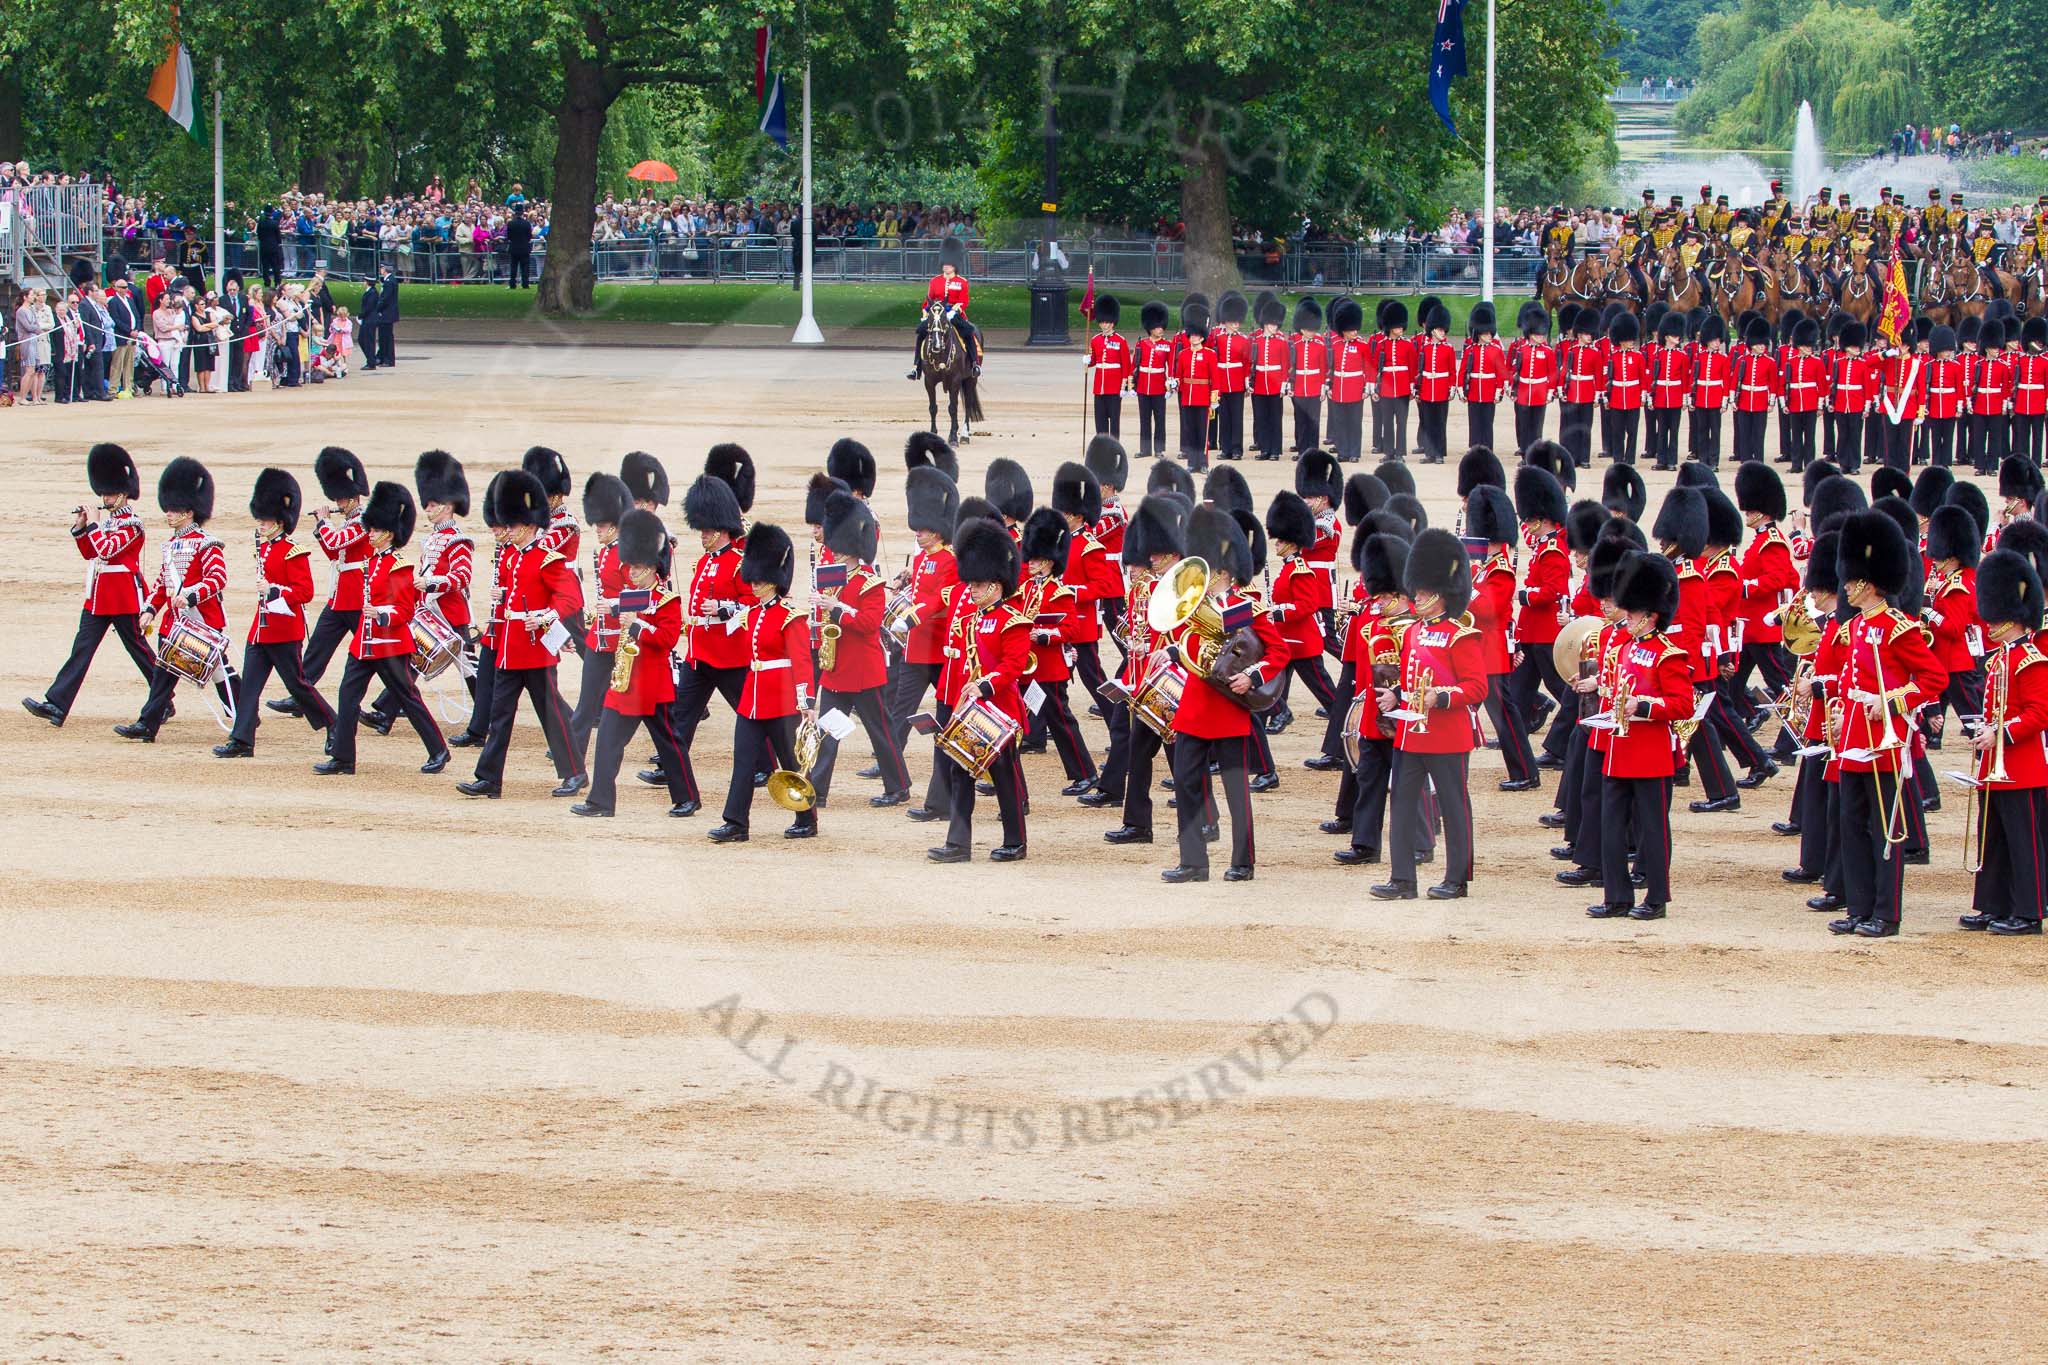 Trooping the Colour 2014.
Horse Guards Parade, Westminster,
London SW1A,

United Kingdom,
on 14 June 2014 at 11:53, image #714